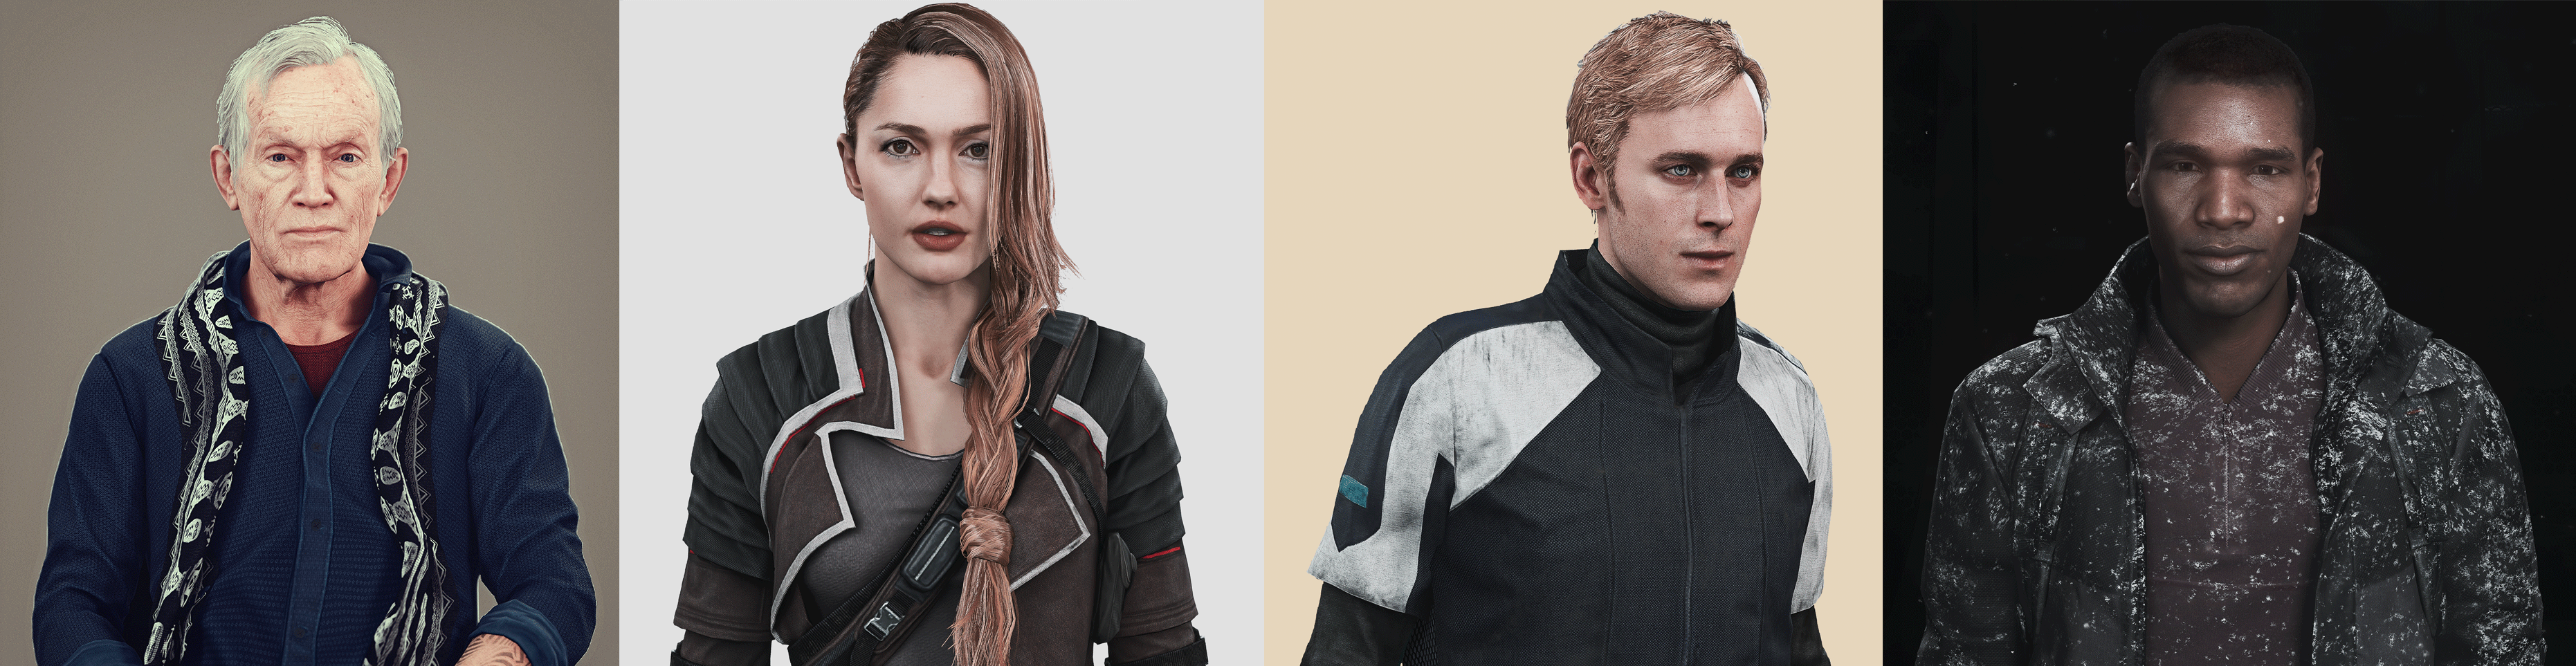 detroit become human pc differences